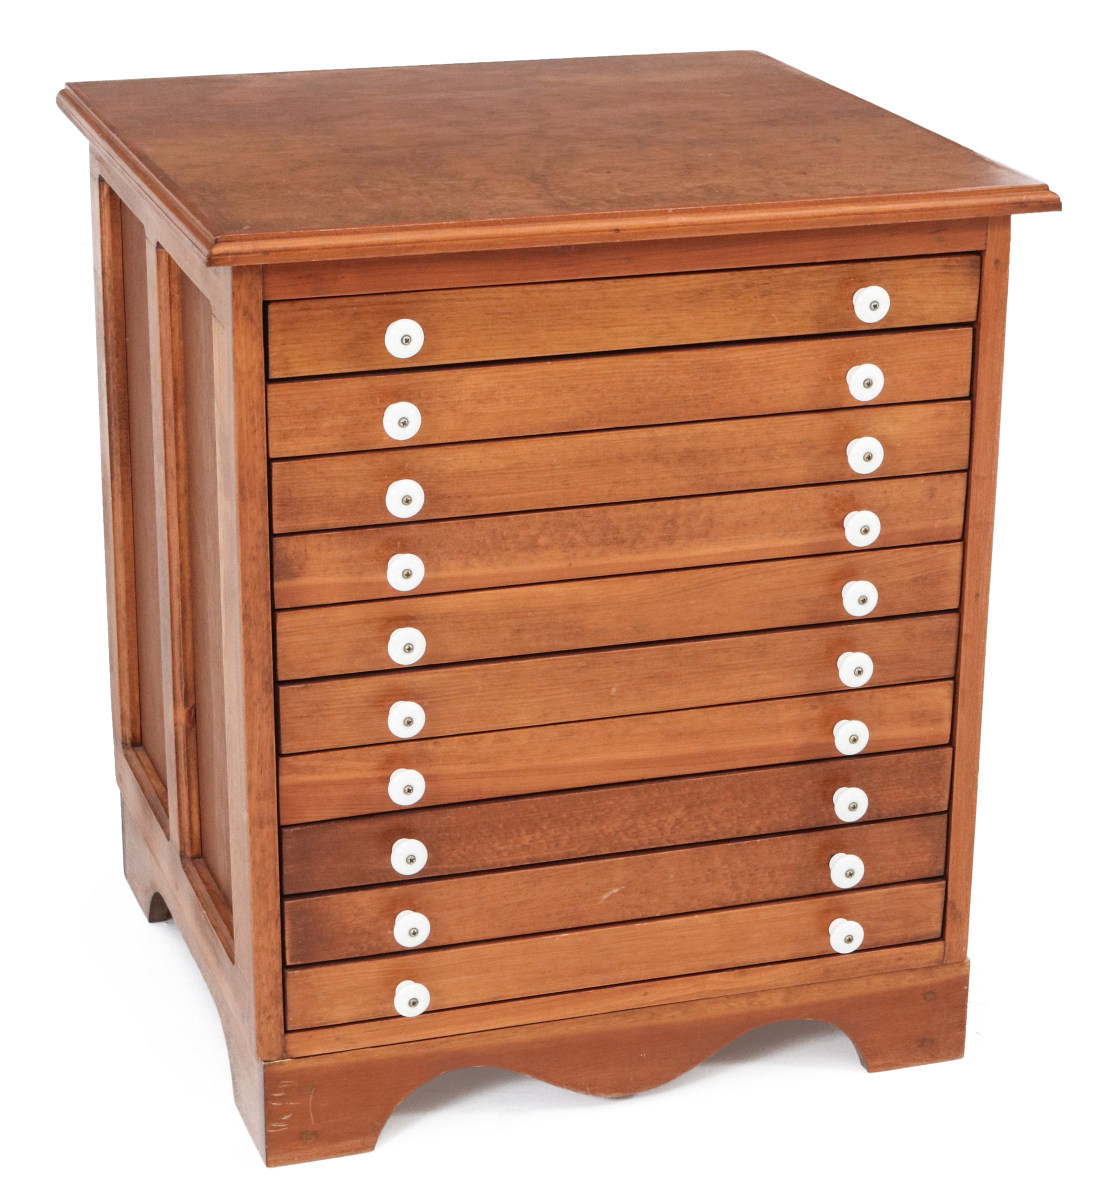 A LATE 20TH CENTURY TEN DRAWER PANELED CABINET